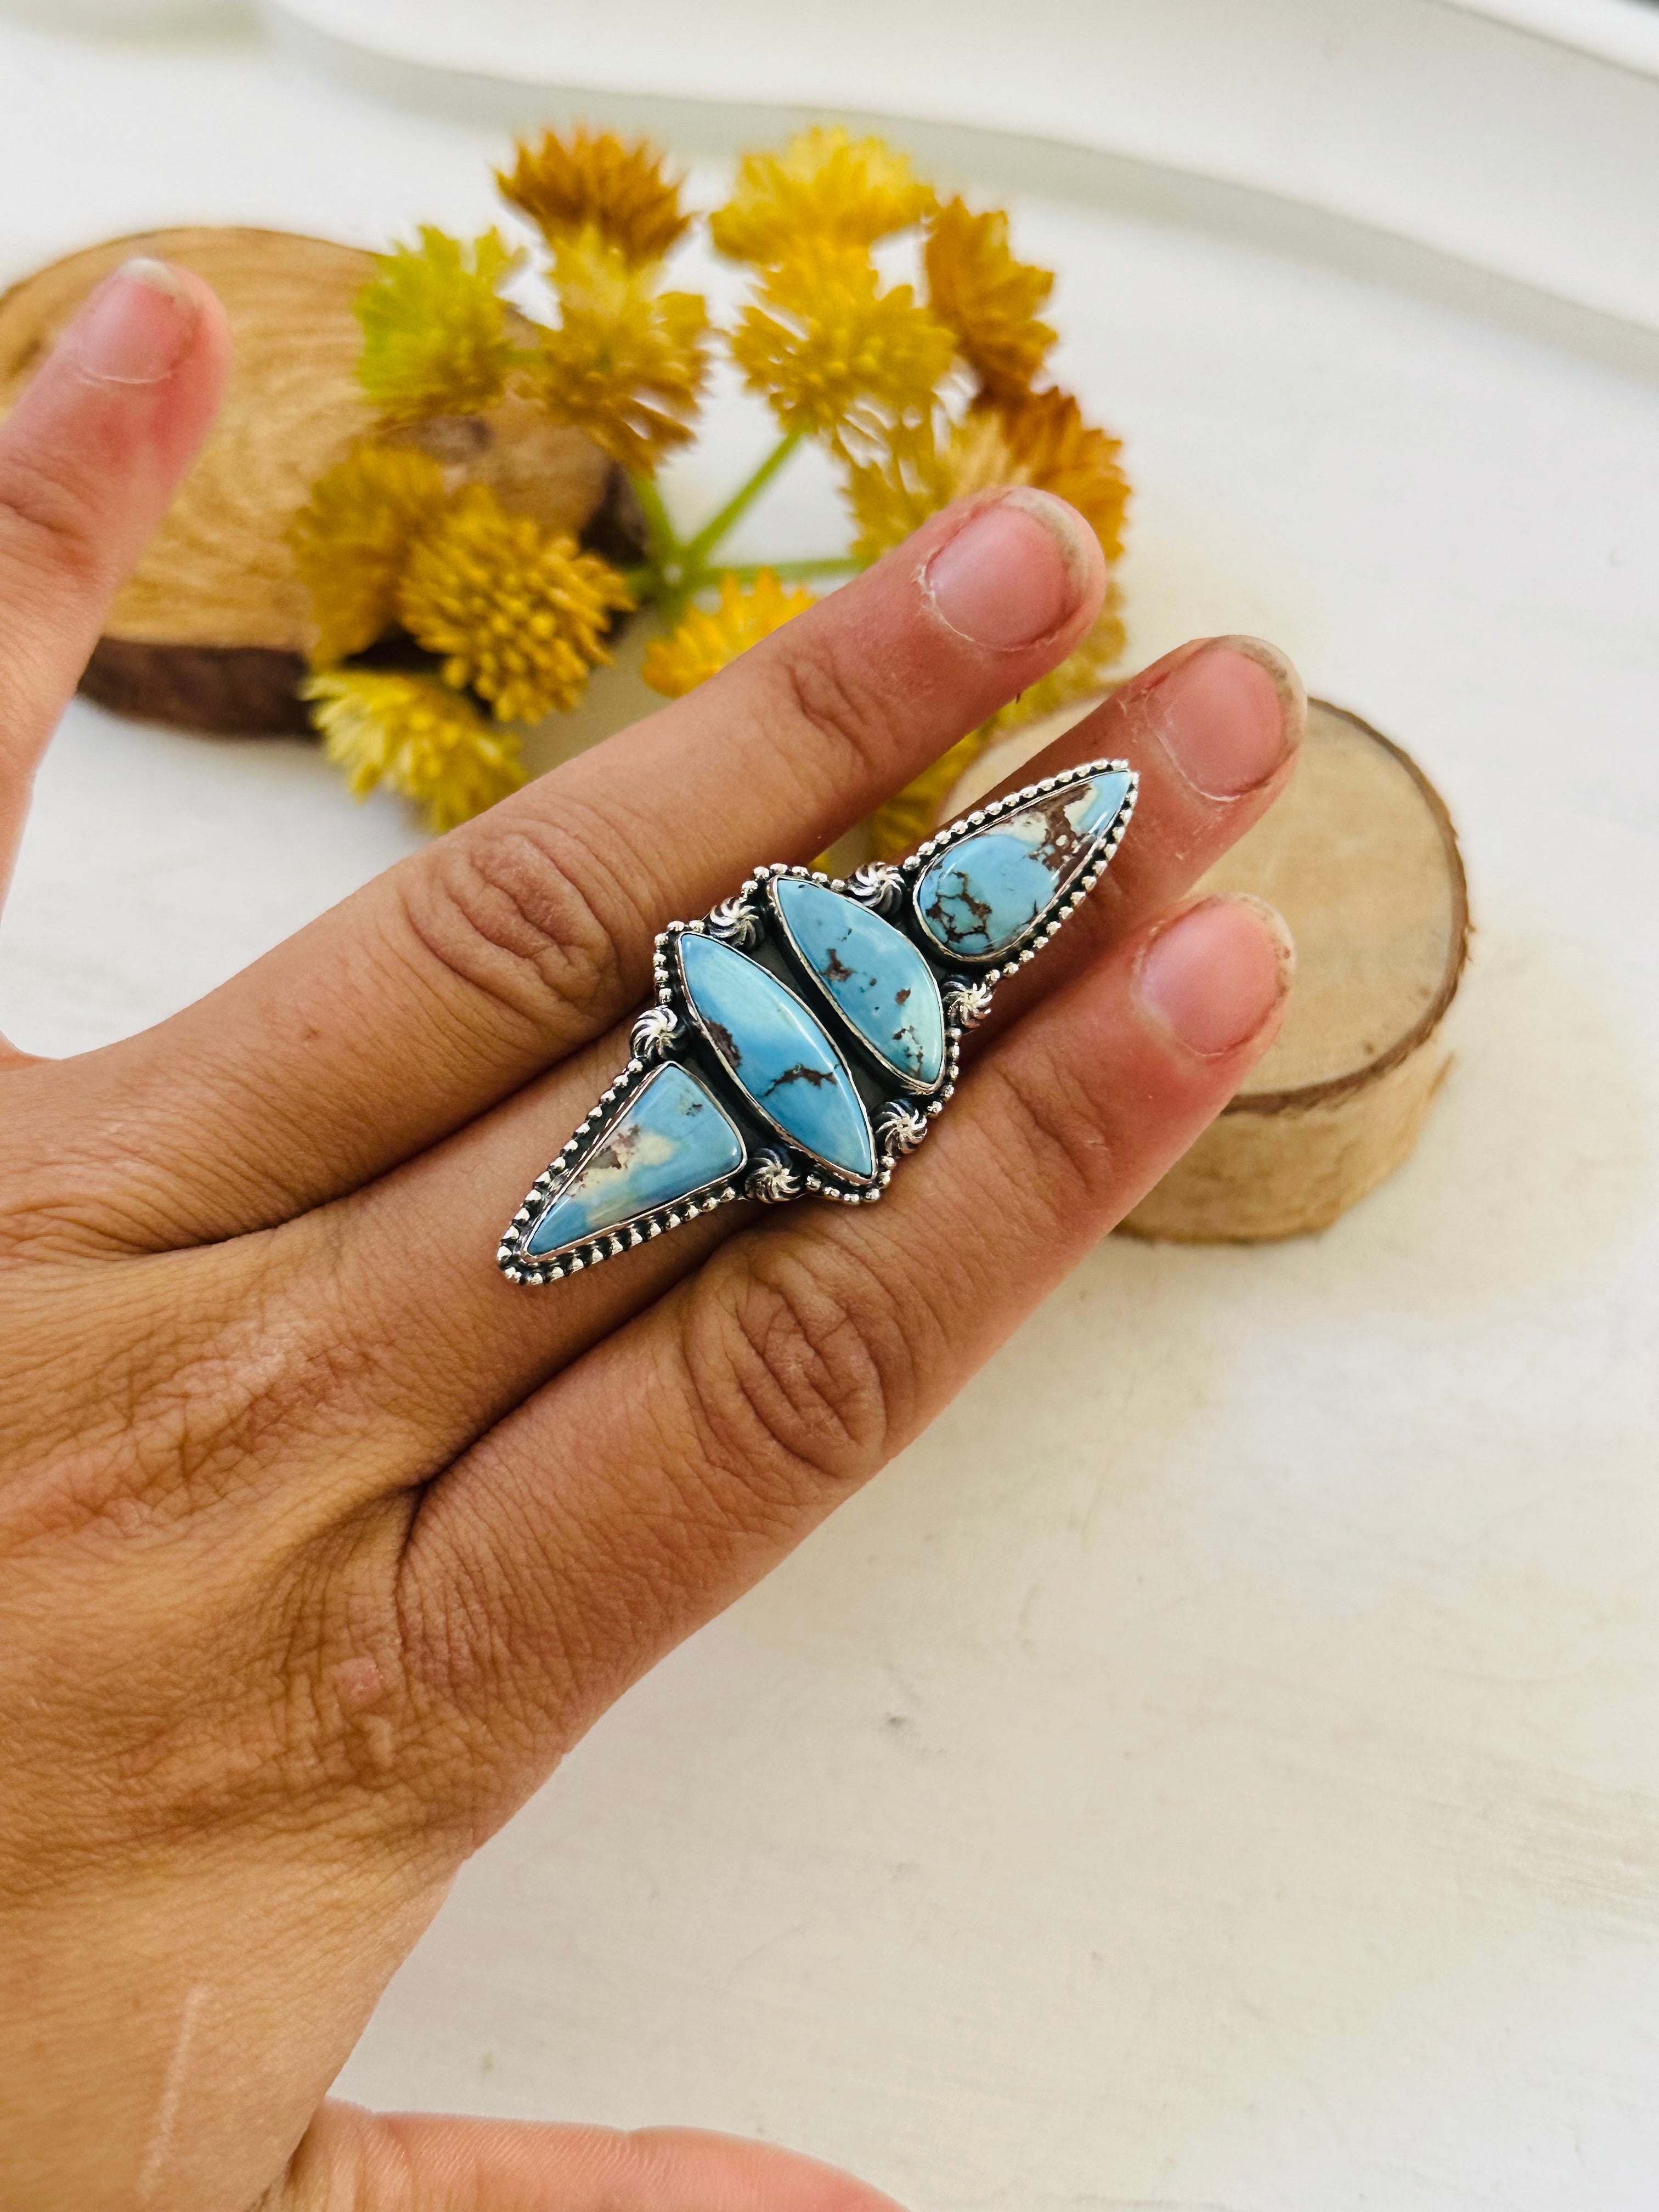 Southwest Handmade Golden Hills Turquoise & Sterling Silver Ring Size 7